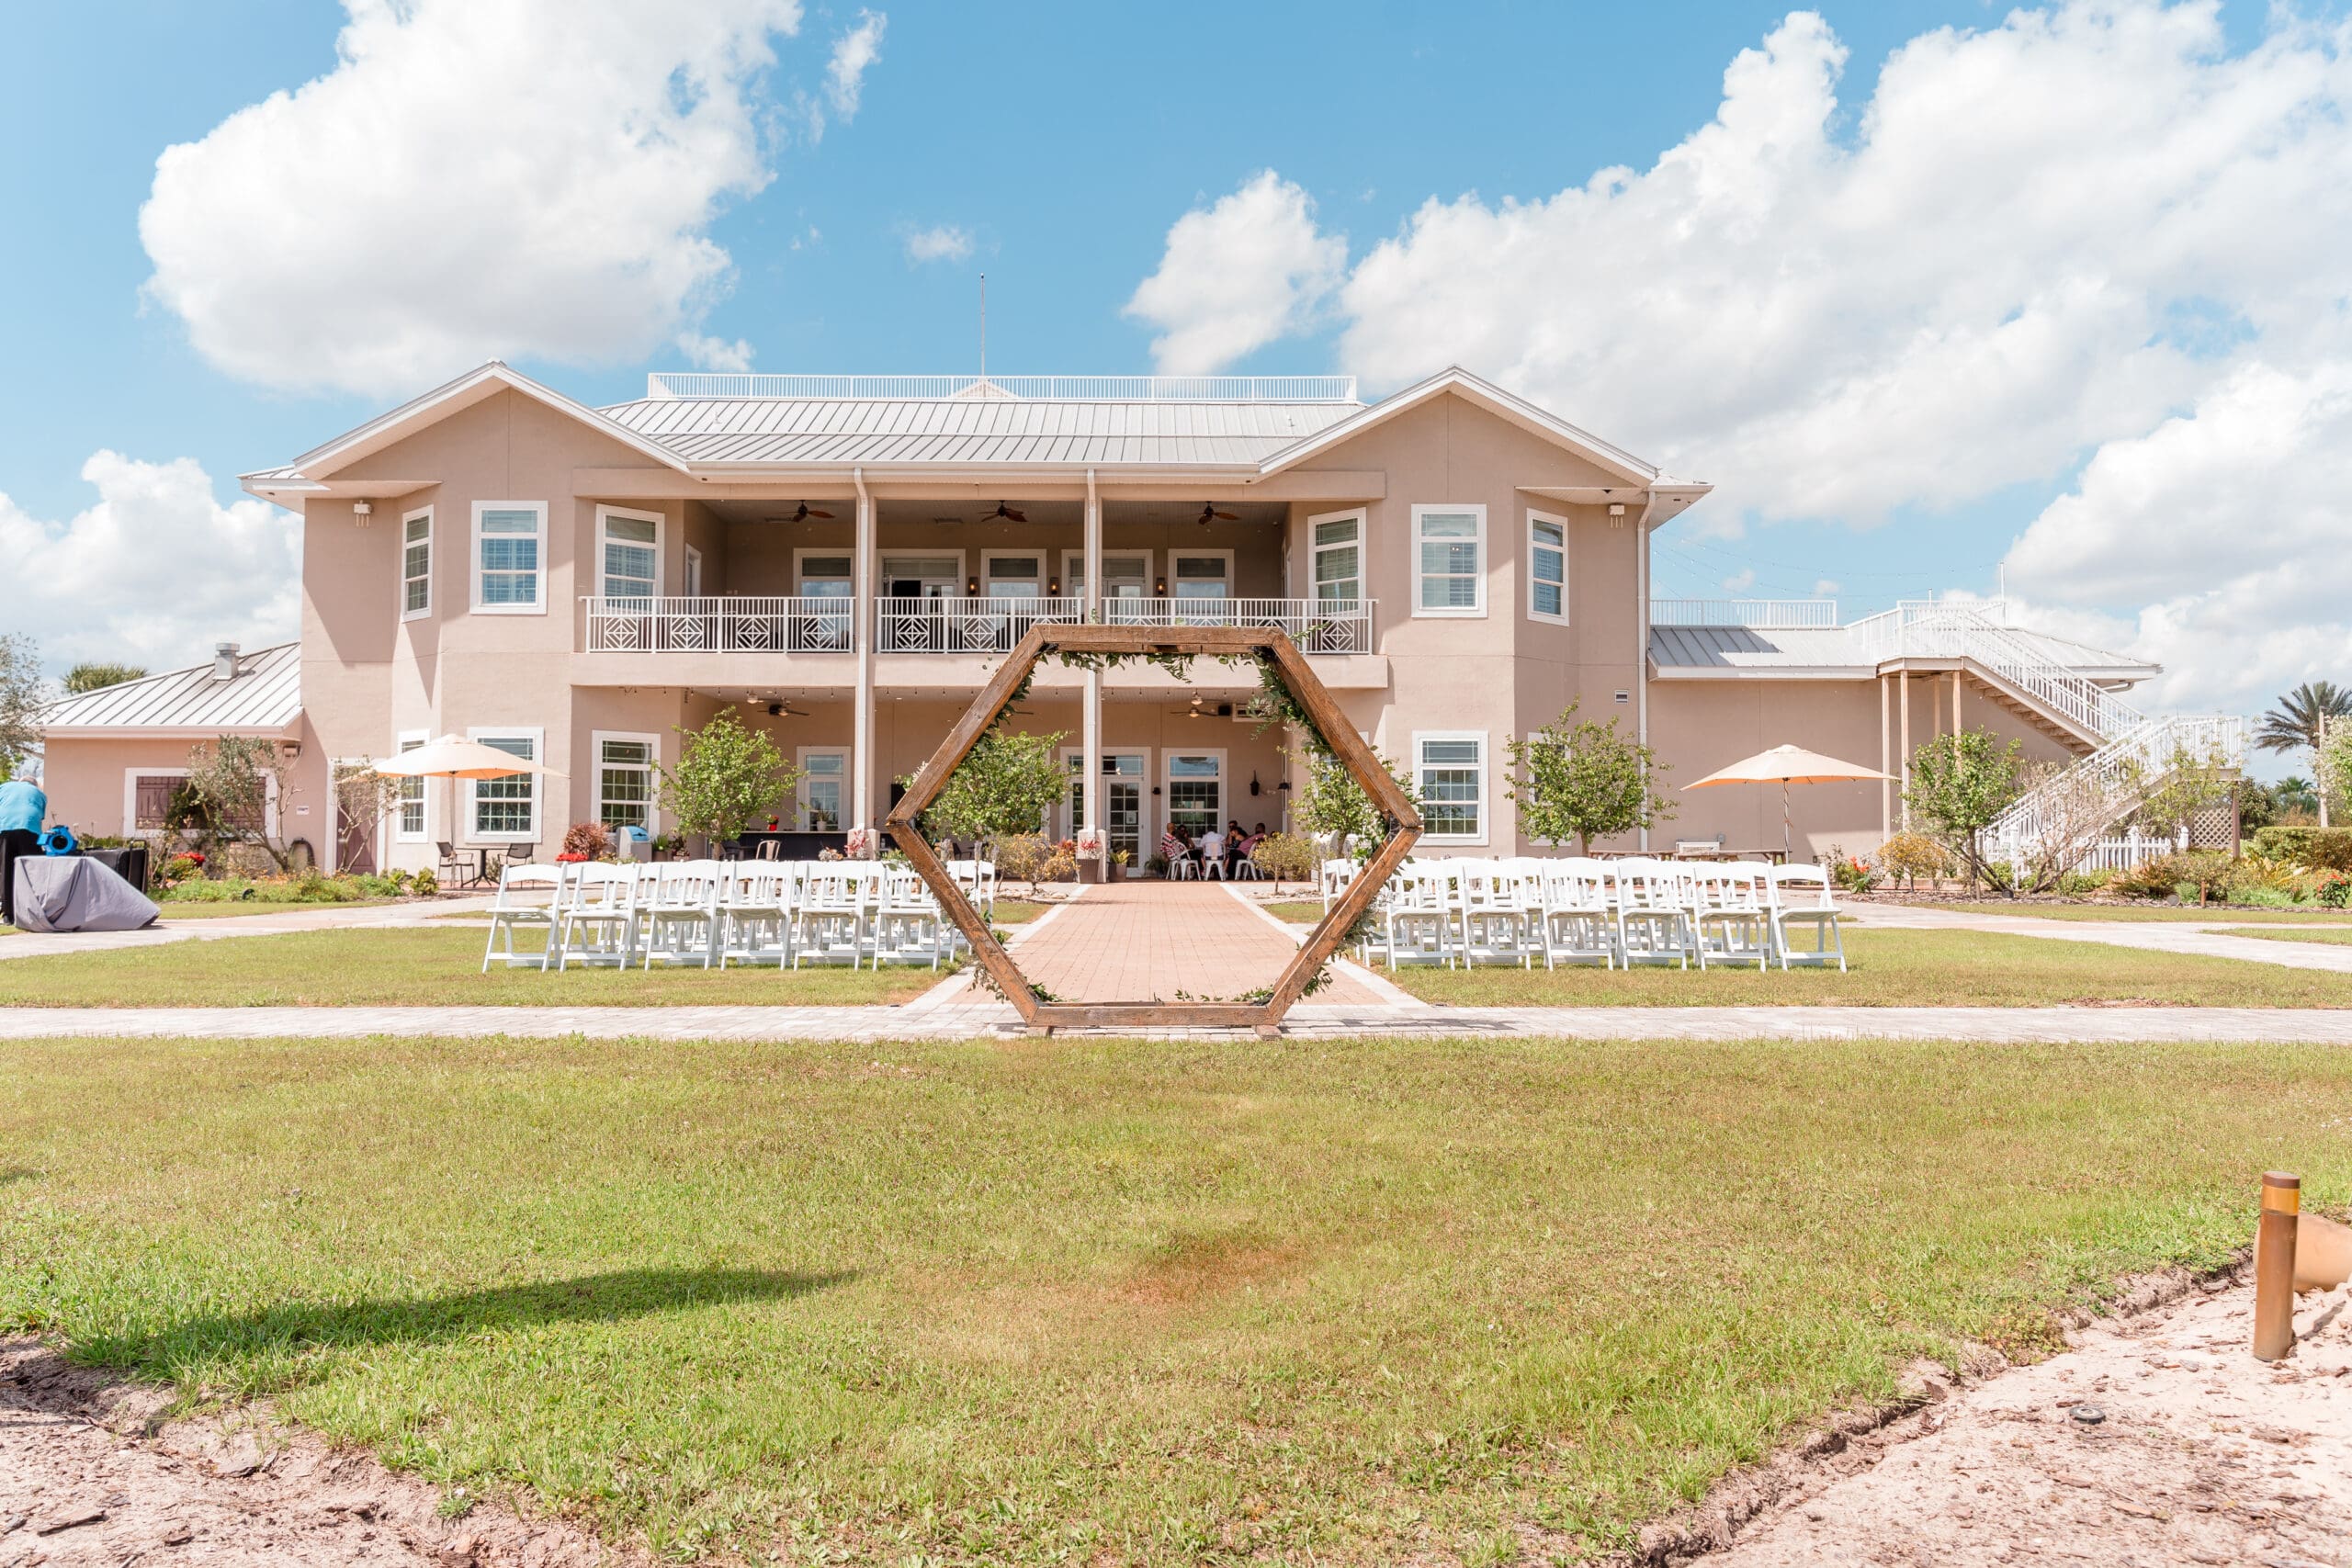 Ground view of the outdoor wedding altar and guest chairs at Island Grove Recreational Center.